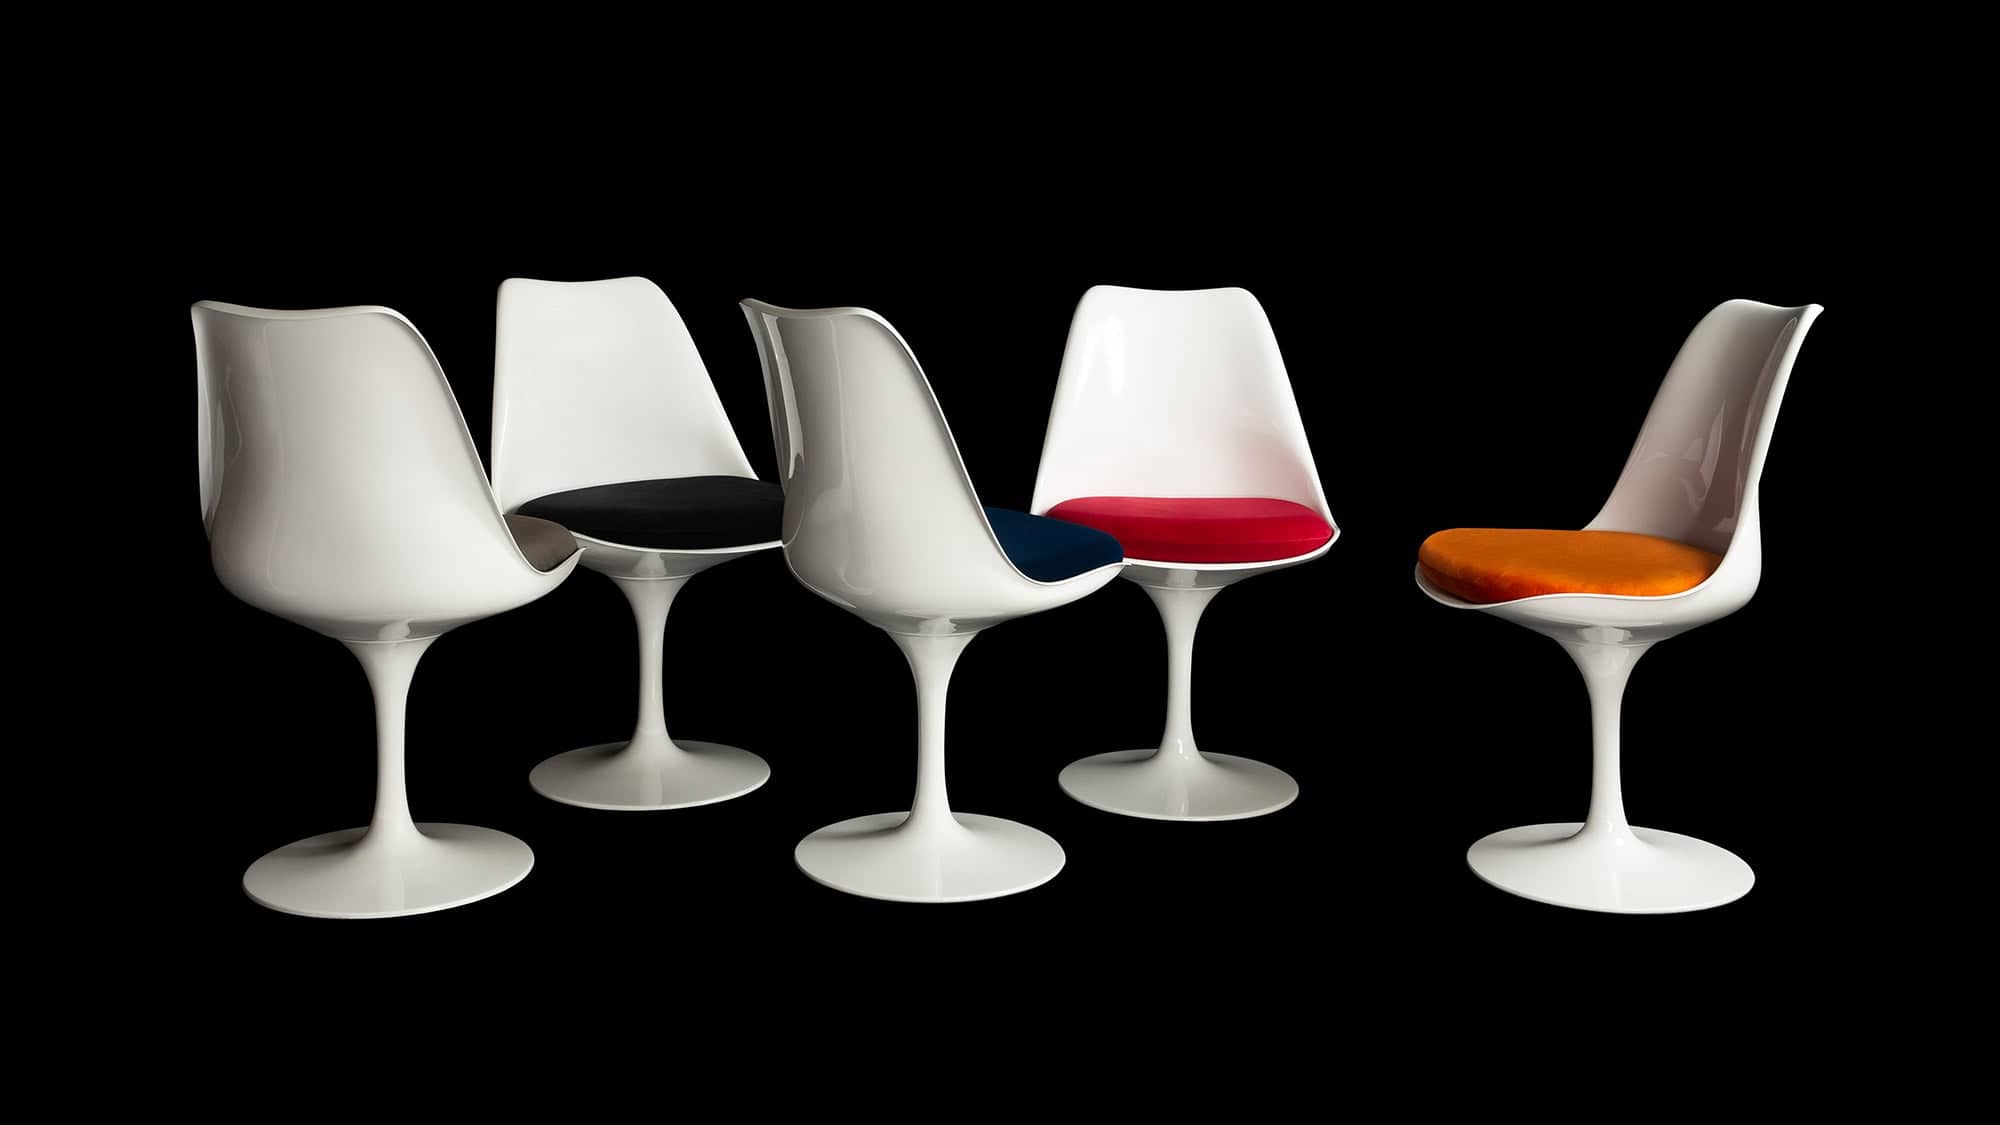 The Little Tulip Shop is the home of the Saarinen Tulip Side Chair, seen here in white with 5 different coloured chair cushions against black backdrop